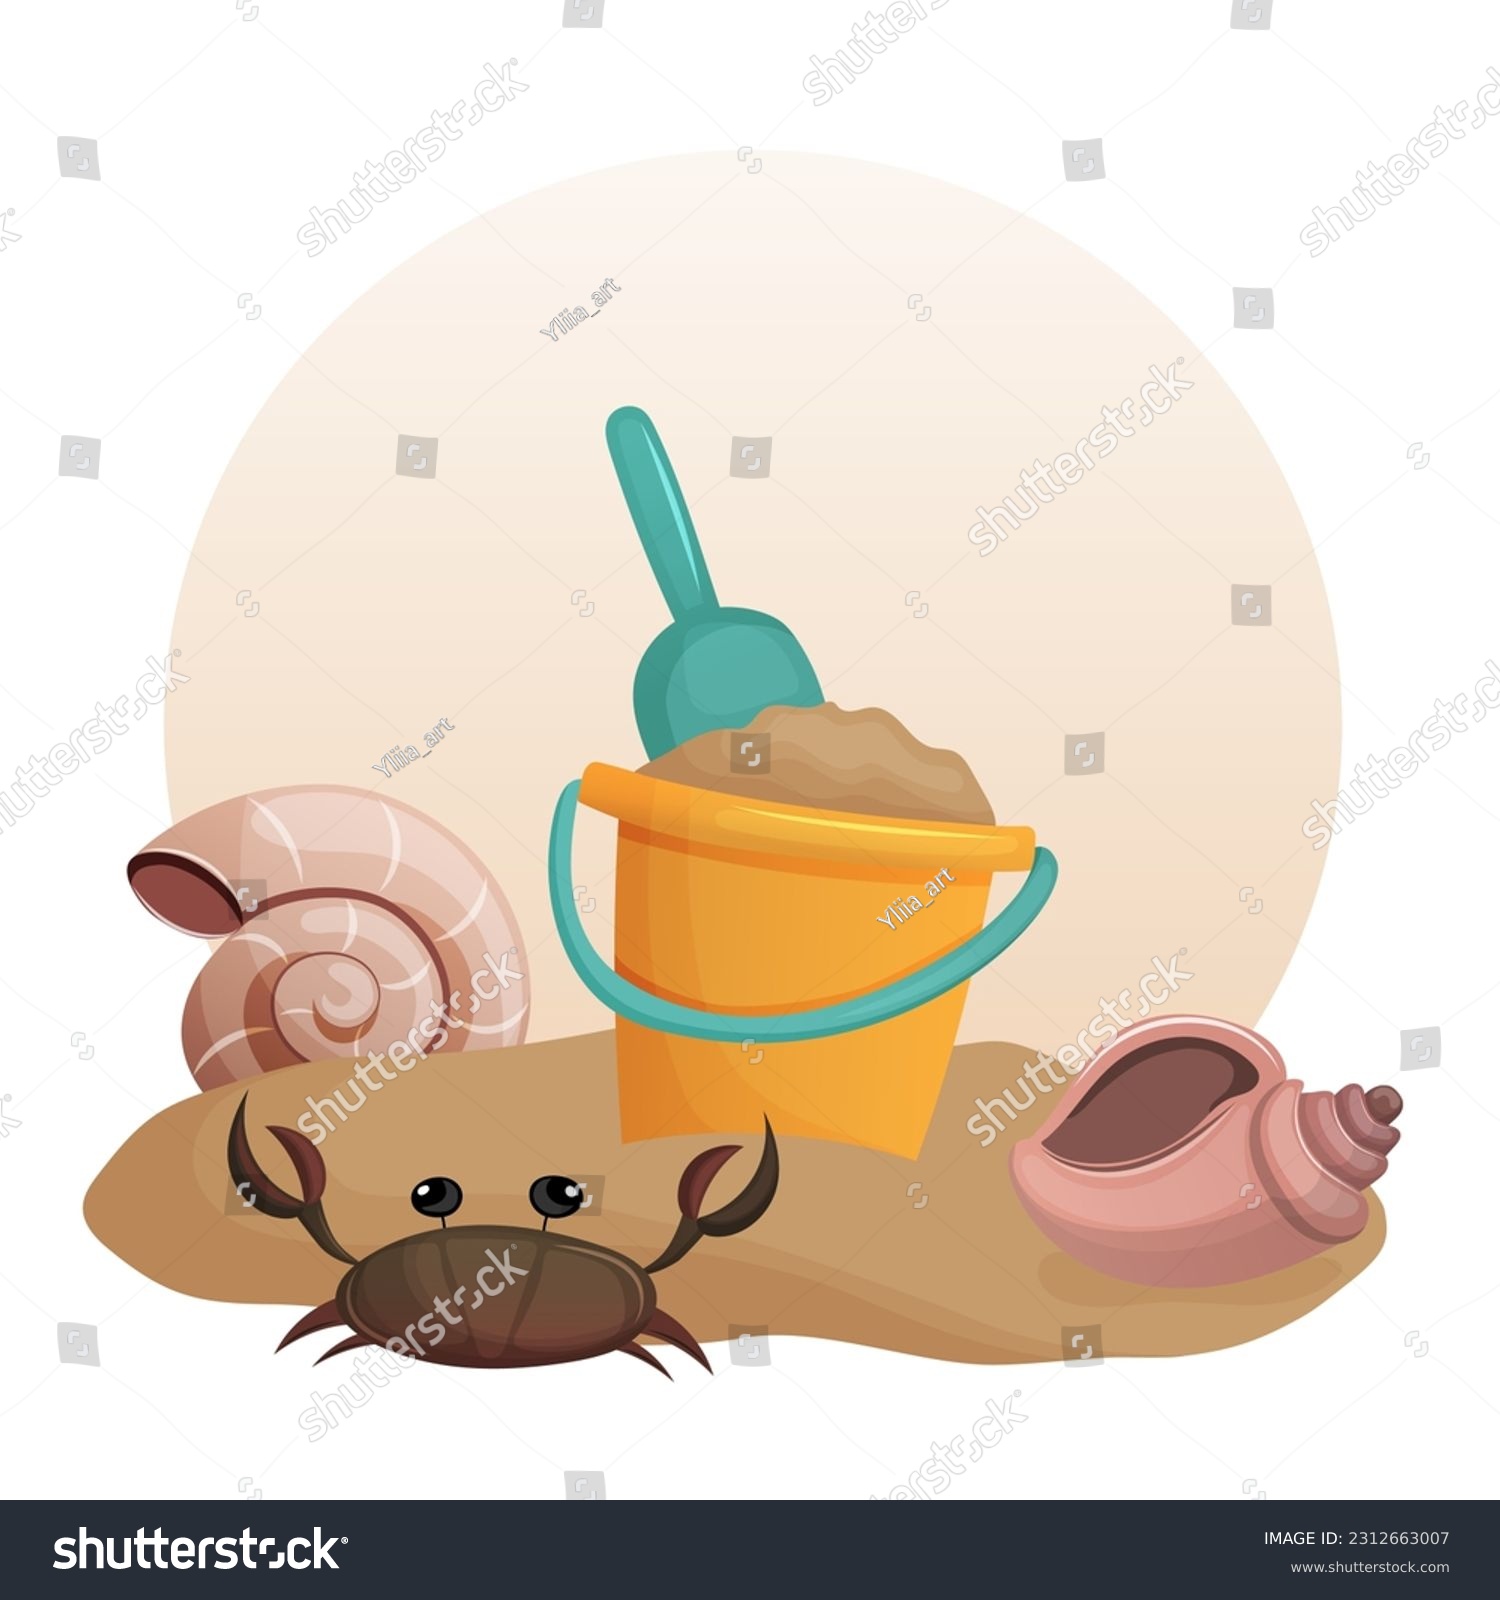 SVG of Yellow Bucket with shovel for playing on the beach and building sand castles. Vector illustration. Cartoon. svg